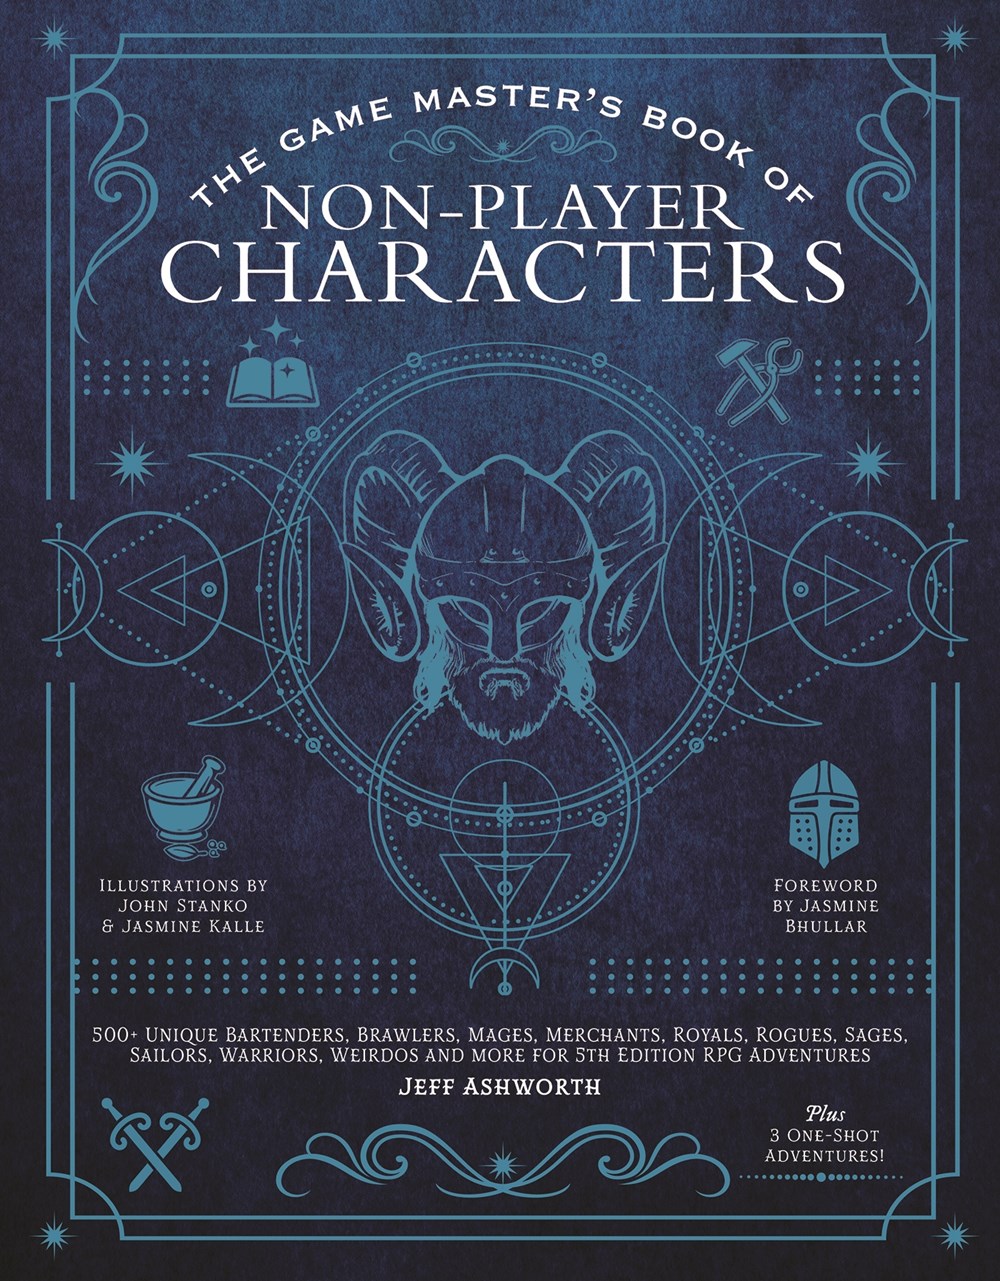 The Game Master's Book of Non-Player Characters: 500+ Unique Bartenders  Brawlers  Mages  Merchants  Royals  Rogues  Sages  Sailors  Warriors  Weirdos